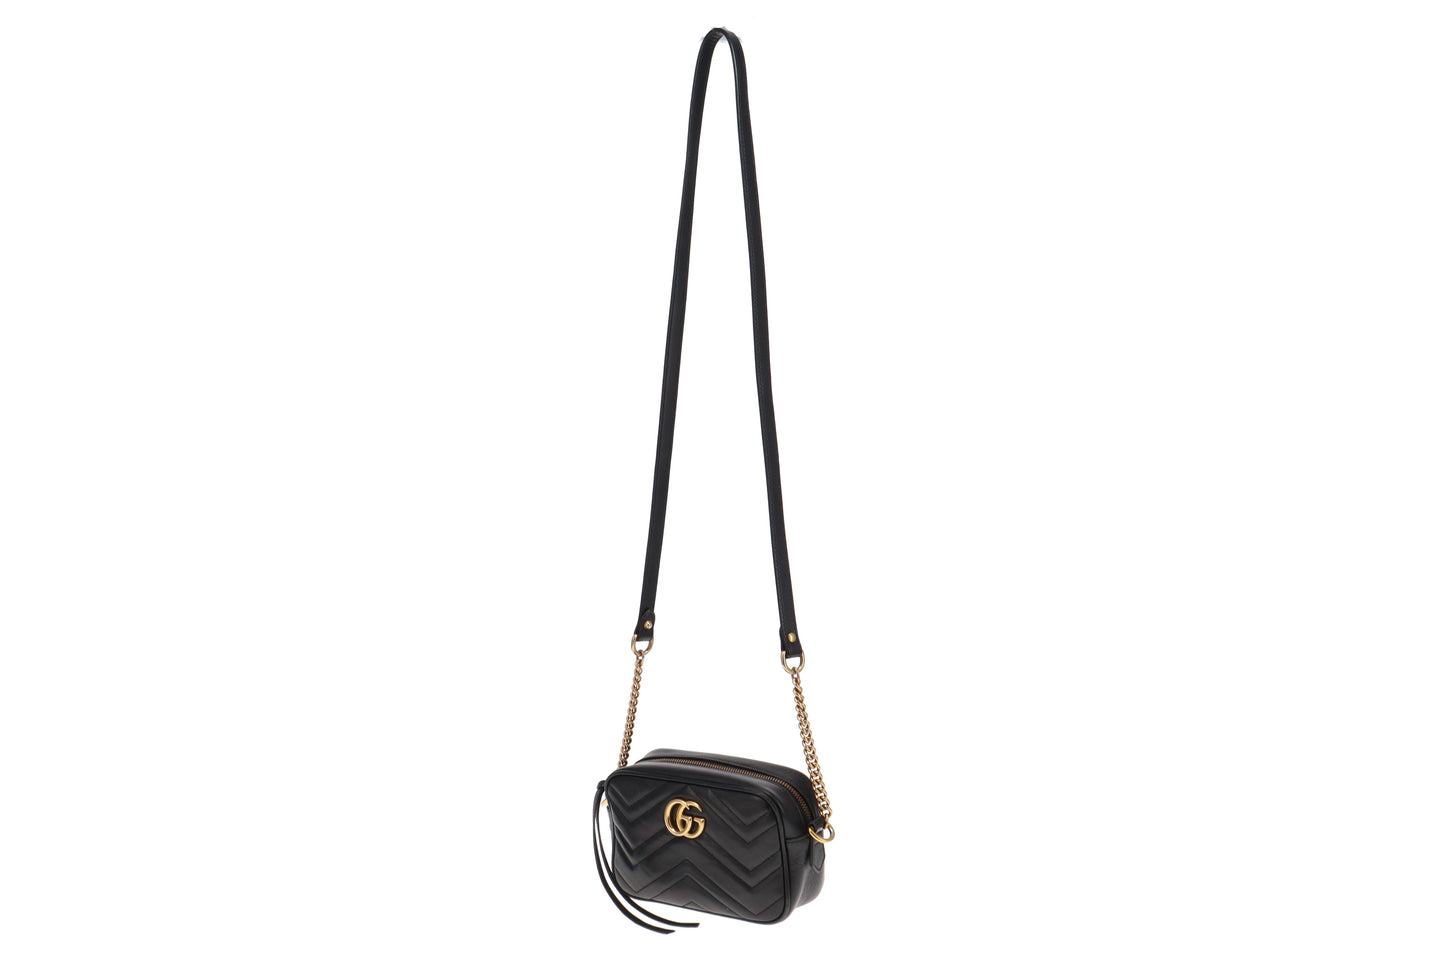 Gucci Black Quilted Leather Marmont Mini Camera Bag